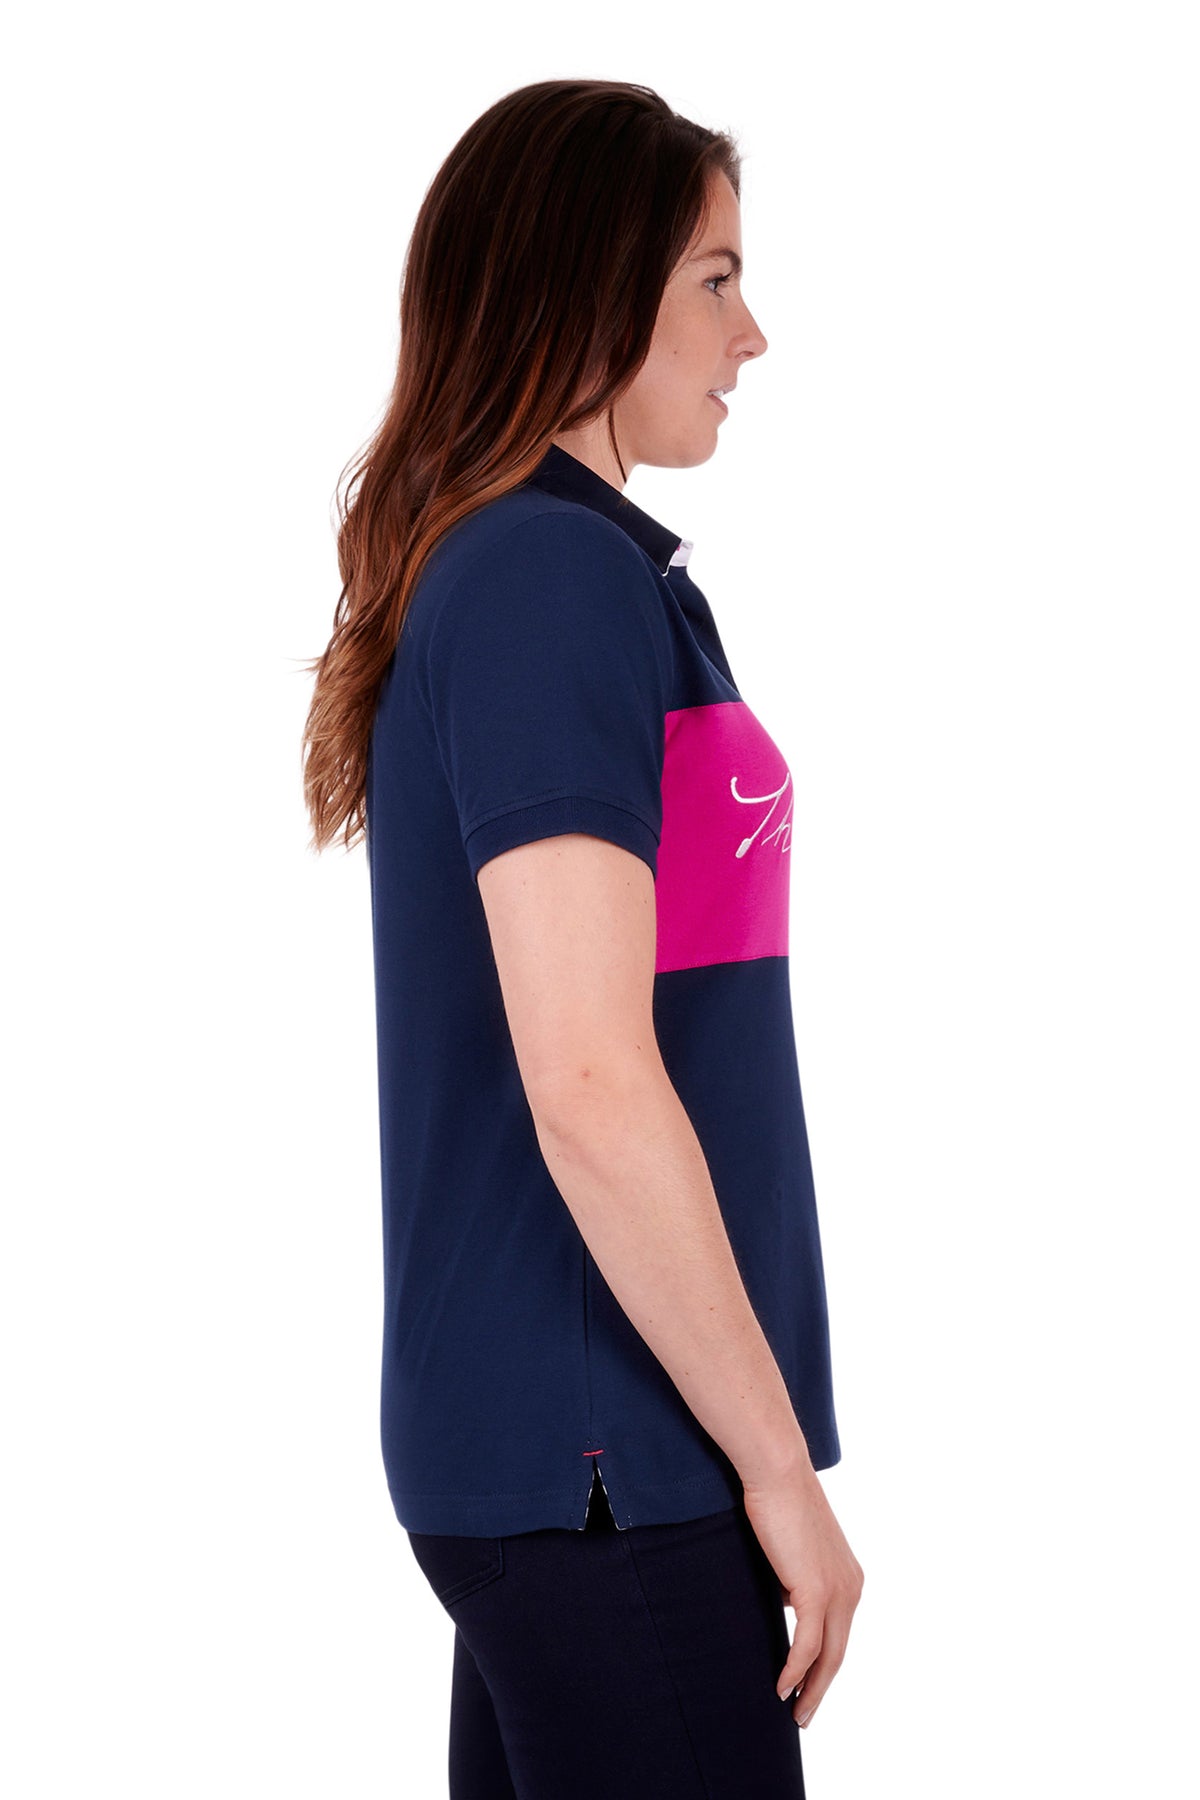 Thomas Cook Womens Lacey Polo - Navy